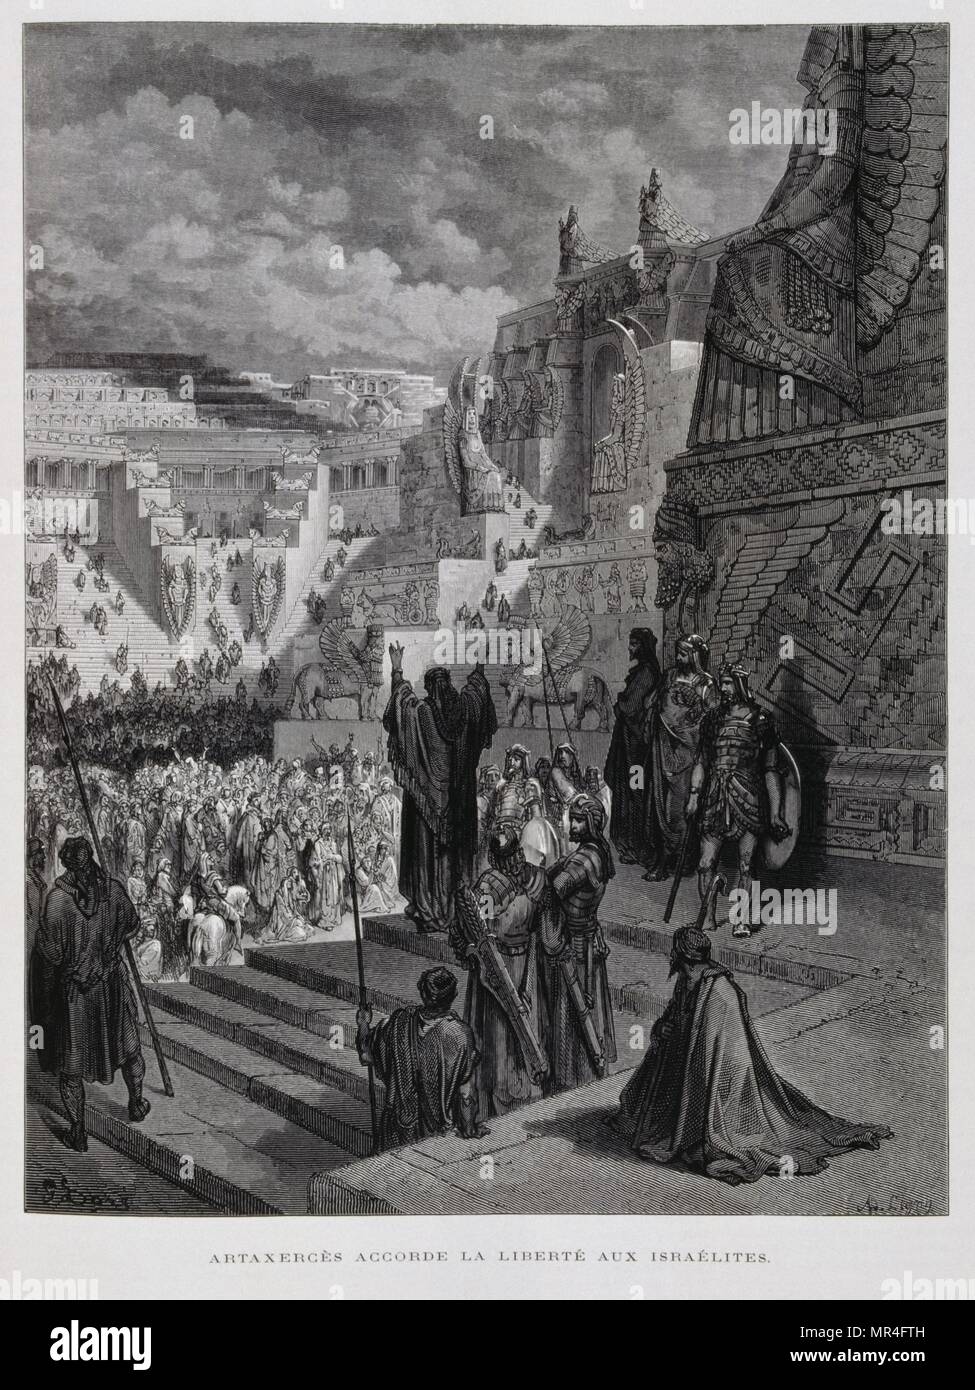 Artaxerxes grants freedom to the Jews in Persia, Illustration from the Dore Bible 1866. In 1866, the French artist and illustrator Gustave Doré (1832–1883), published a series of 241 wood engravings for a new deluxe edition of the 1843 French translation of the Vulgate Bible, popularly known as the Bible de Tours. This new edition was known as La Grande Bible de Tours and its illustrations were immensely successful. Artaxerxes II was king of Persia from 404 B.C. until his death in 358 B.C. Stock Photo